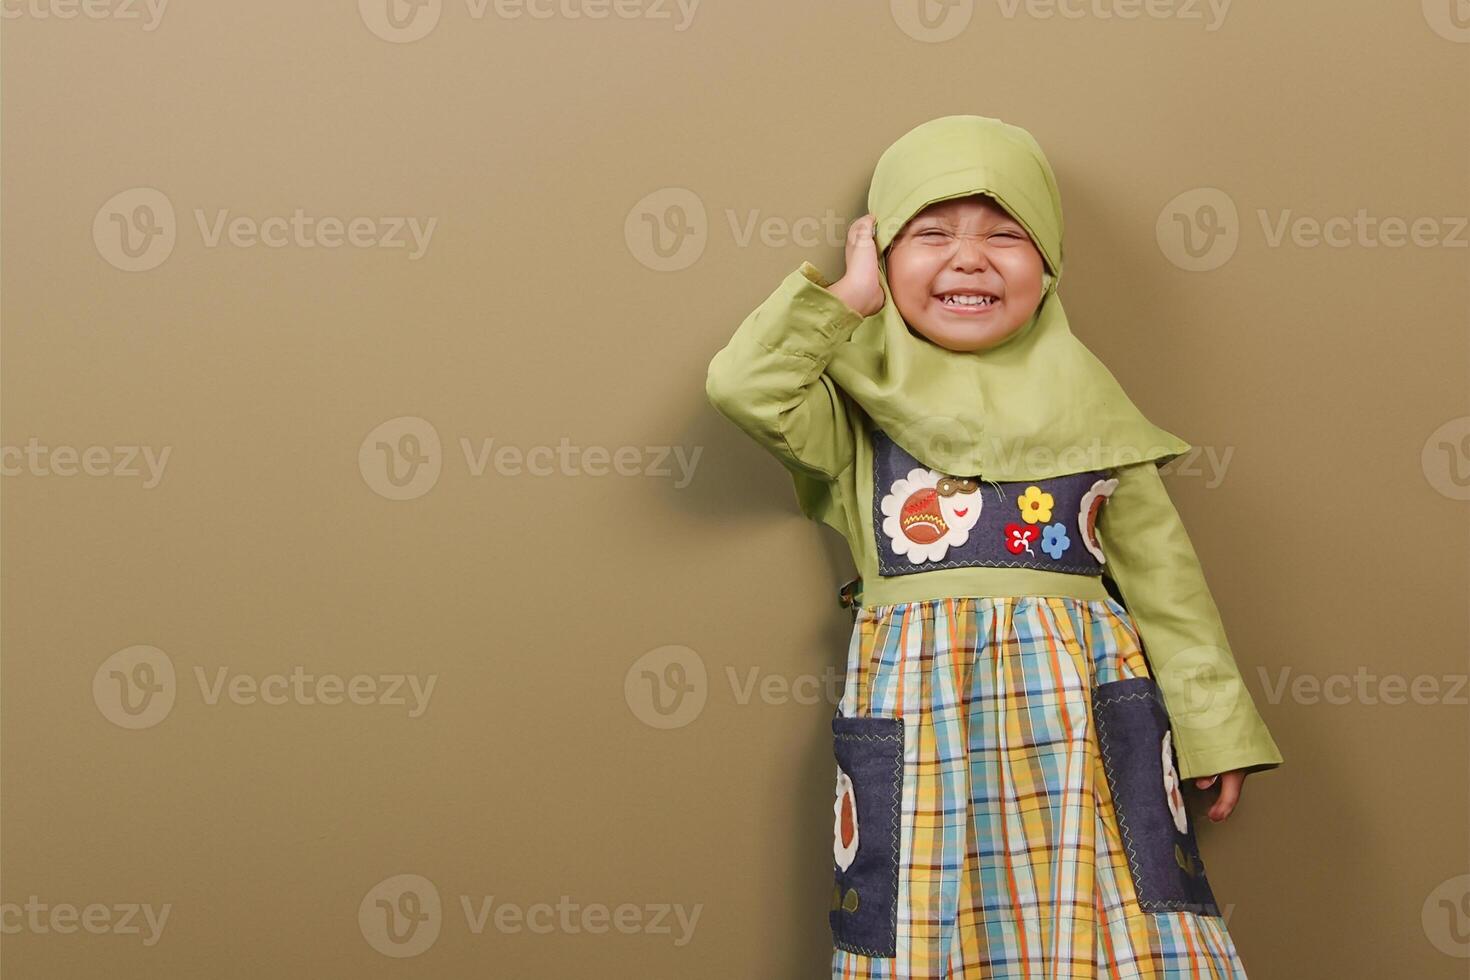 An Indonesian Little girl wearing hijab cloth very excited photo